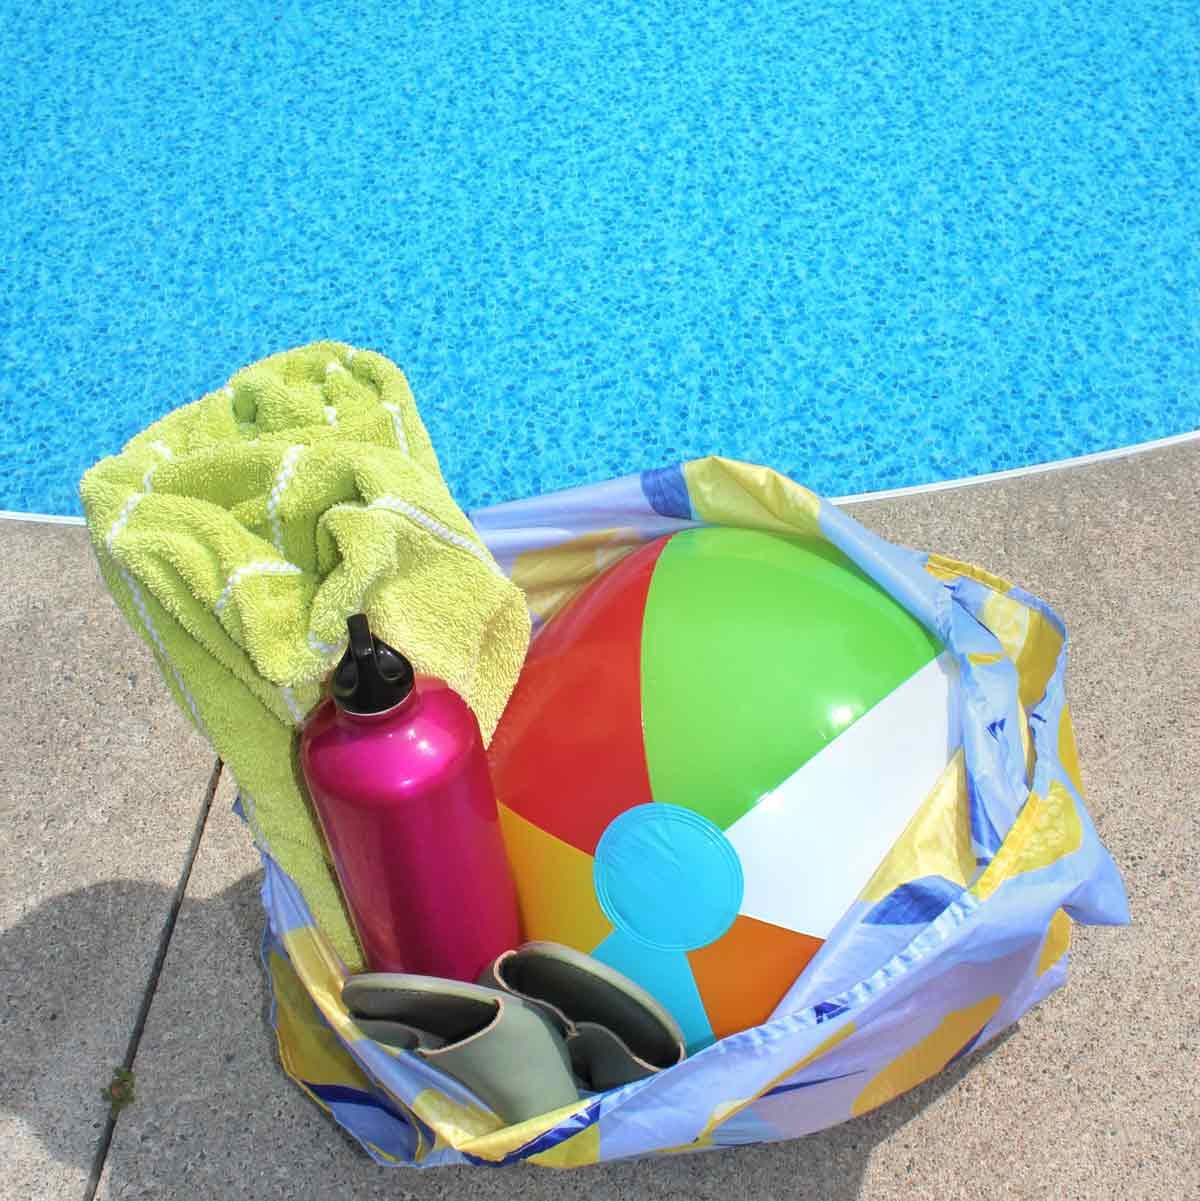 tote bag filled with beach supplies